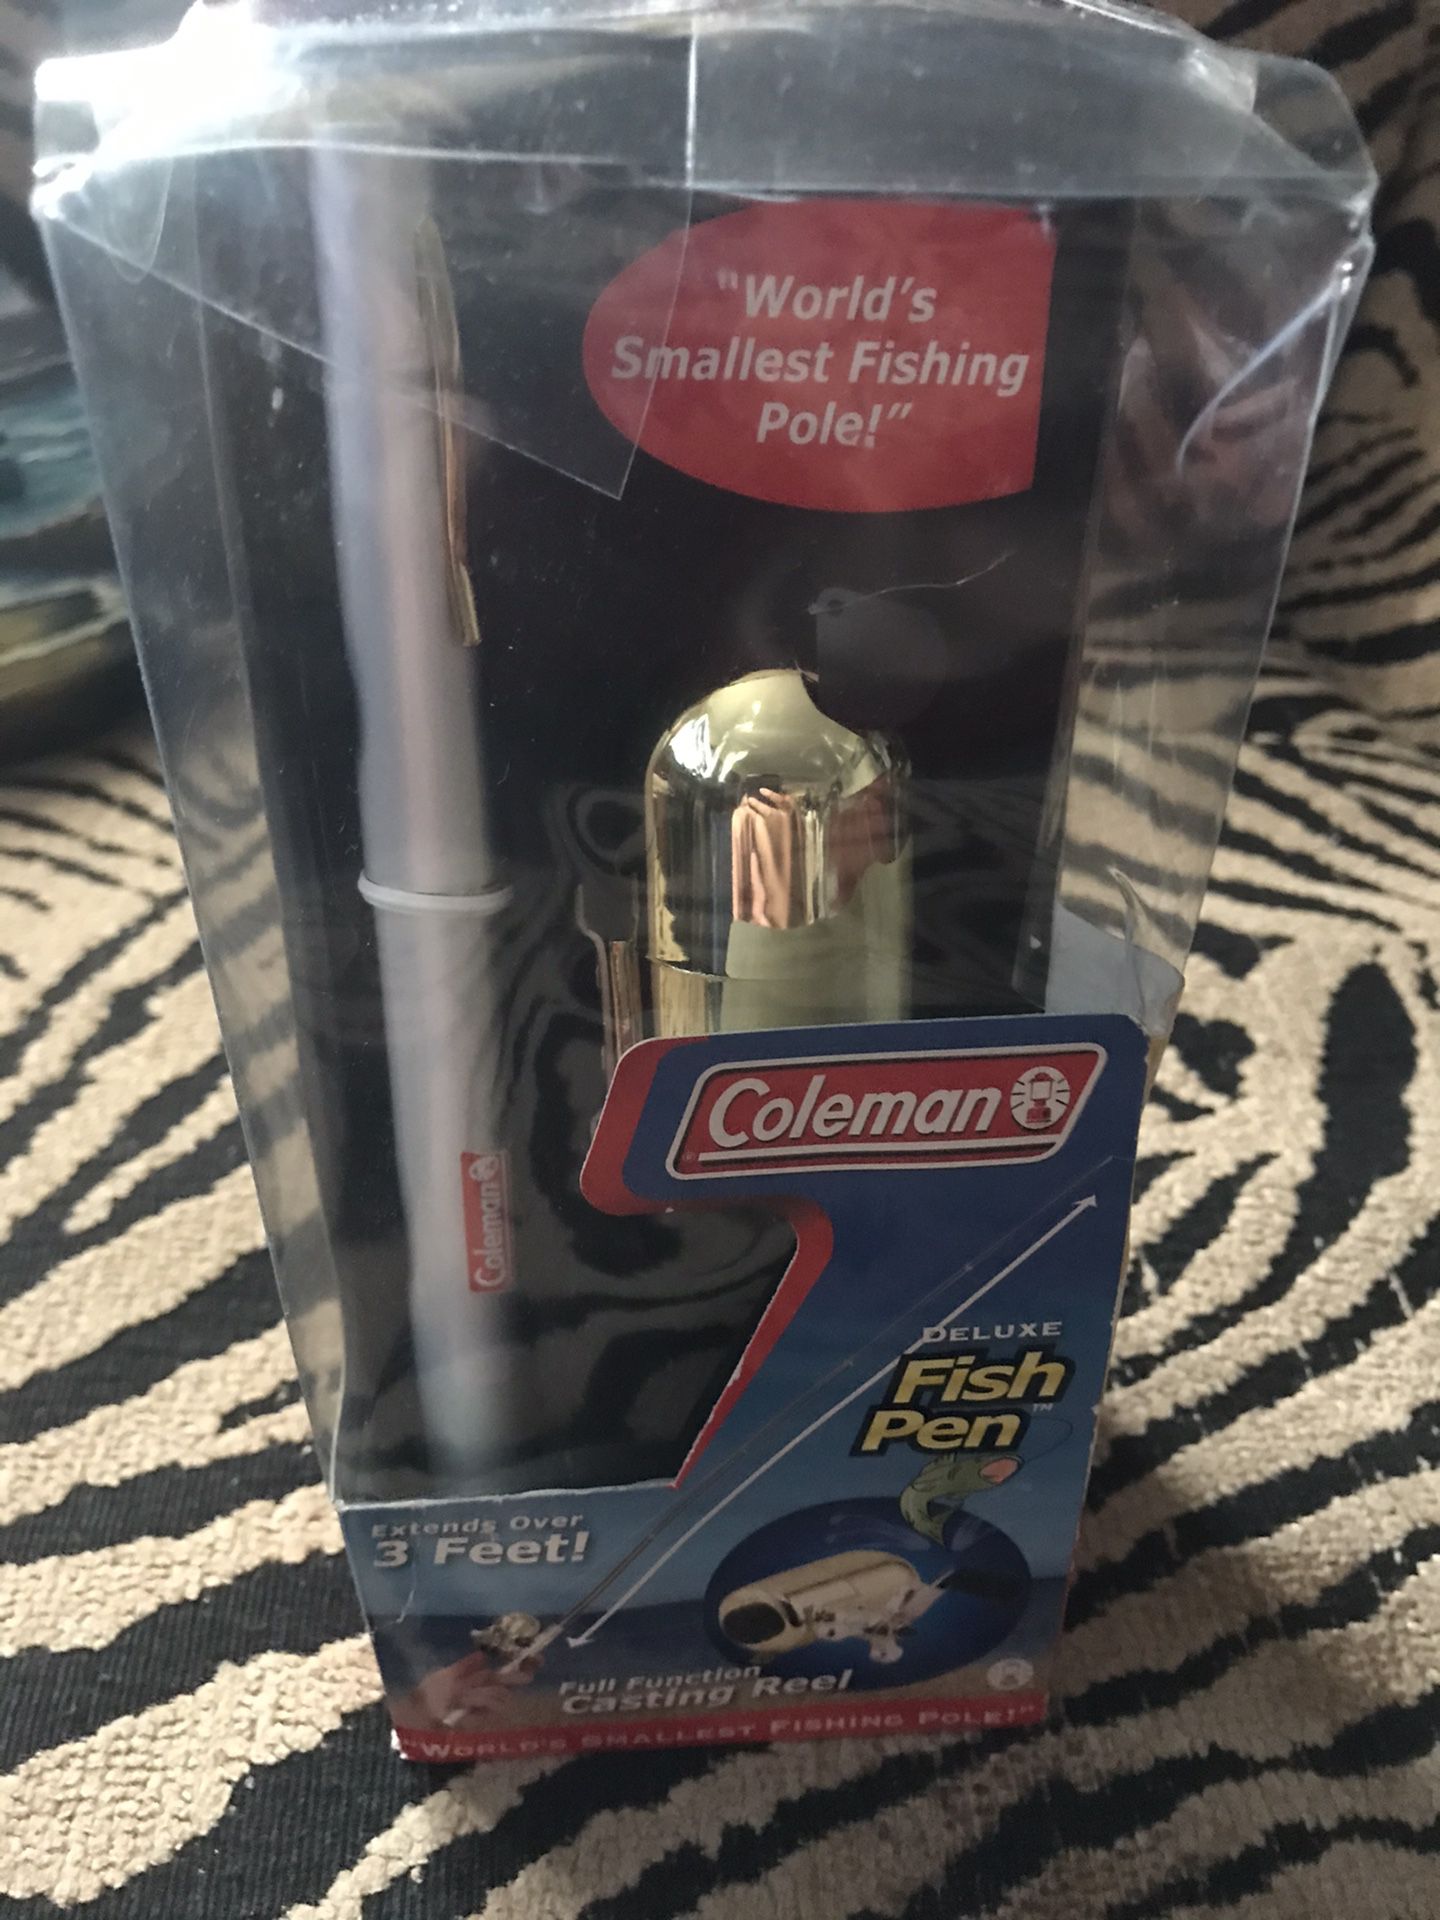 Worlds smallest fishing pole made by Coleman